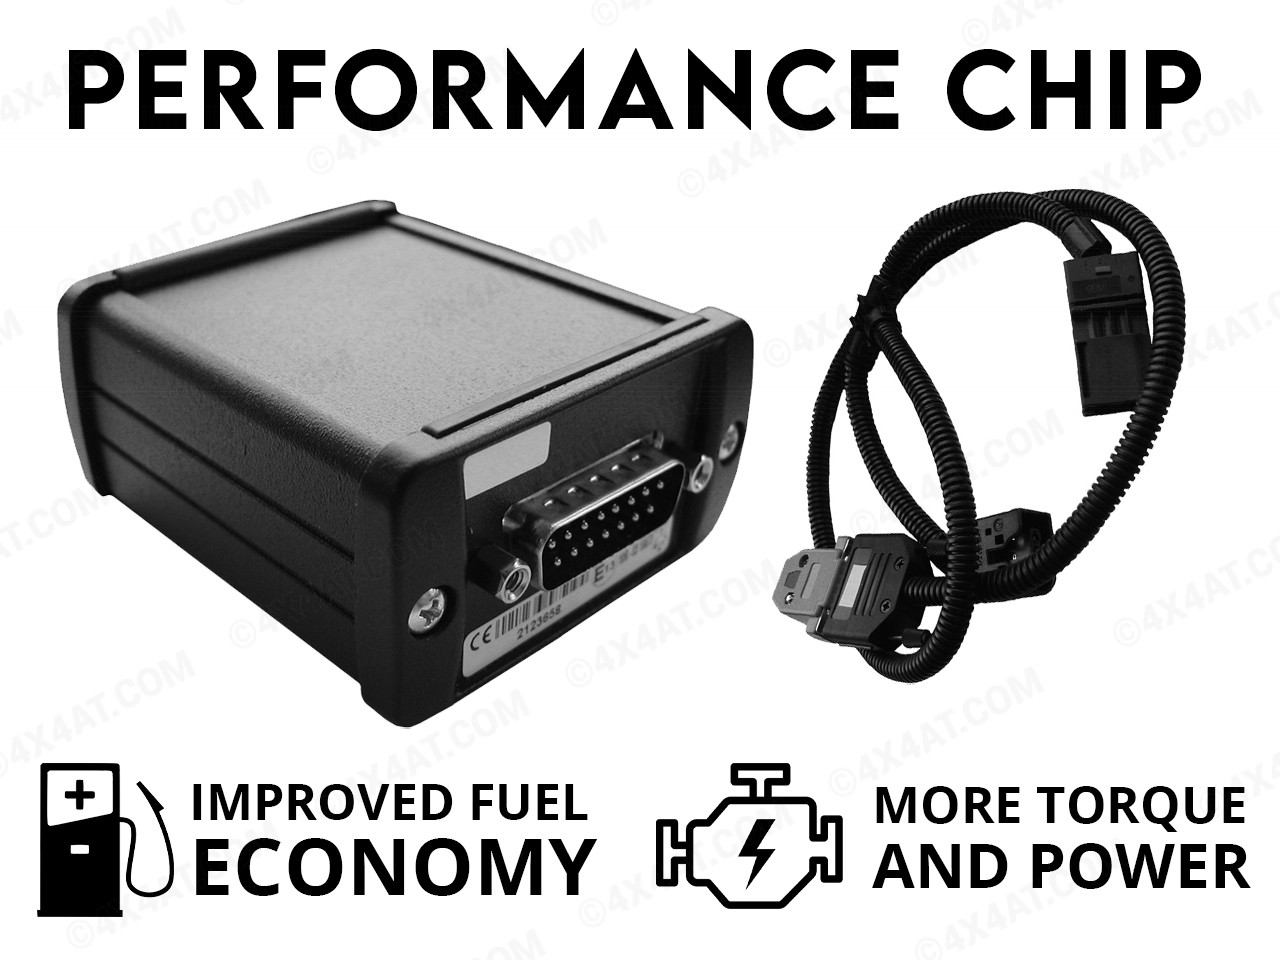 Chip Box Tuning ChipPower CR1 for Hilux VII 3.0 D-4D Performance Economy Diesel